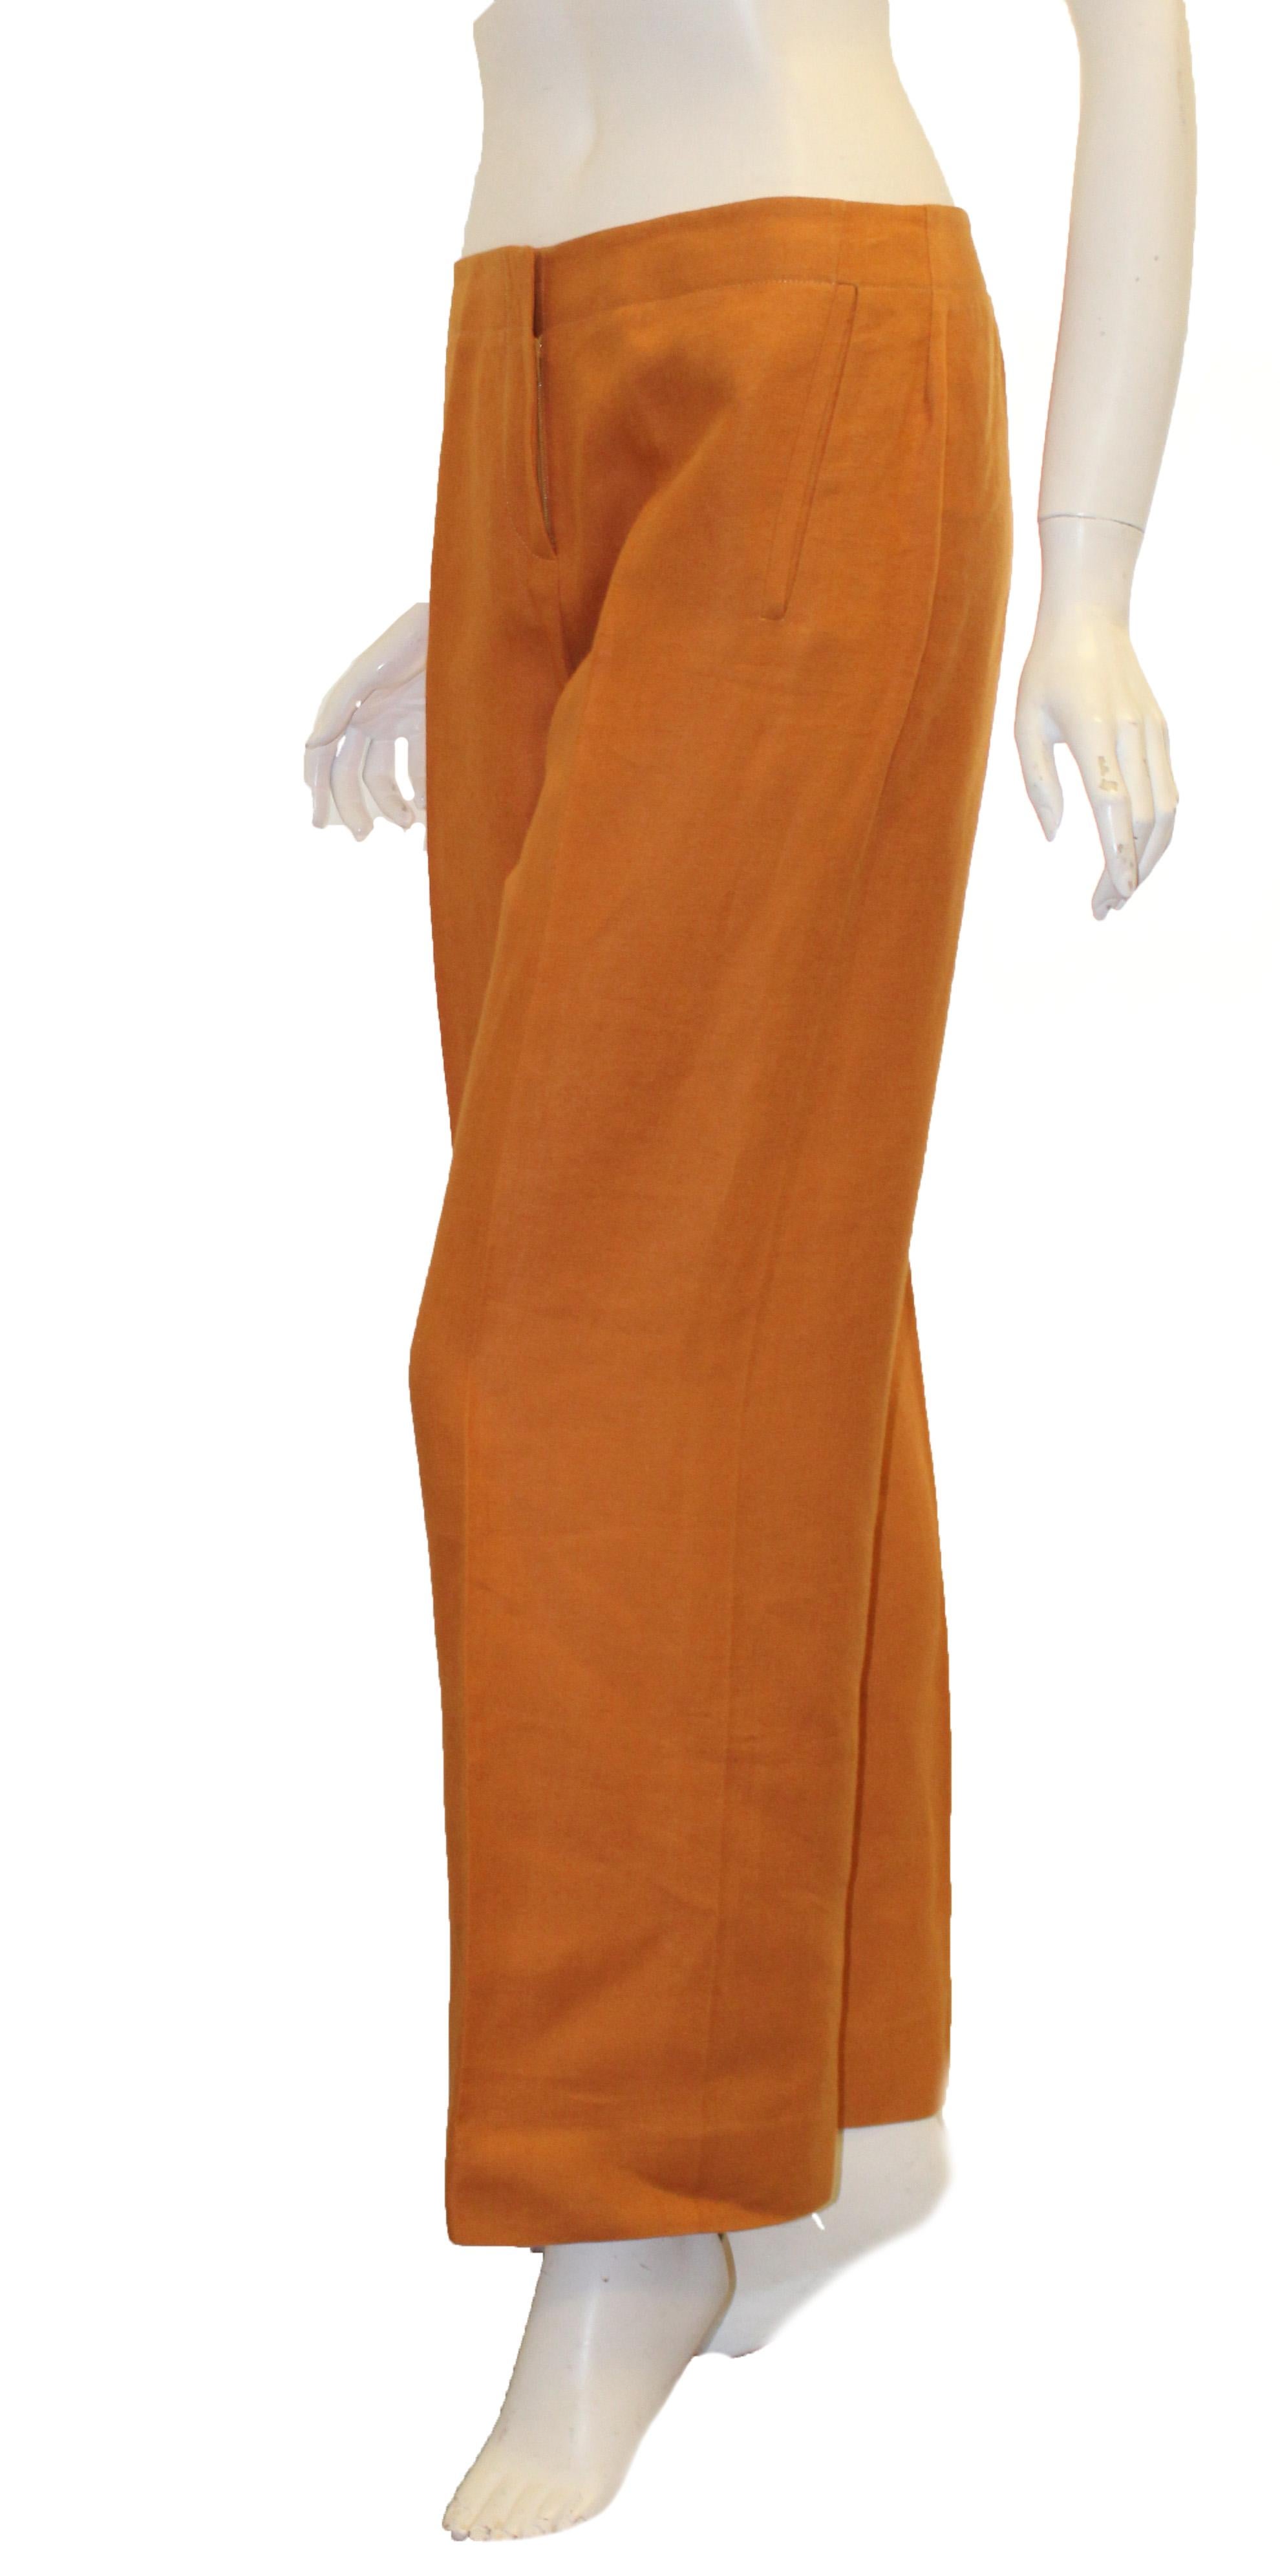 Hermes modern orange linen wide leg fit pants full length incorporates front zipper closure with single button.   These pants are not lined.   Pants in excellent condition.  Made in France. 